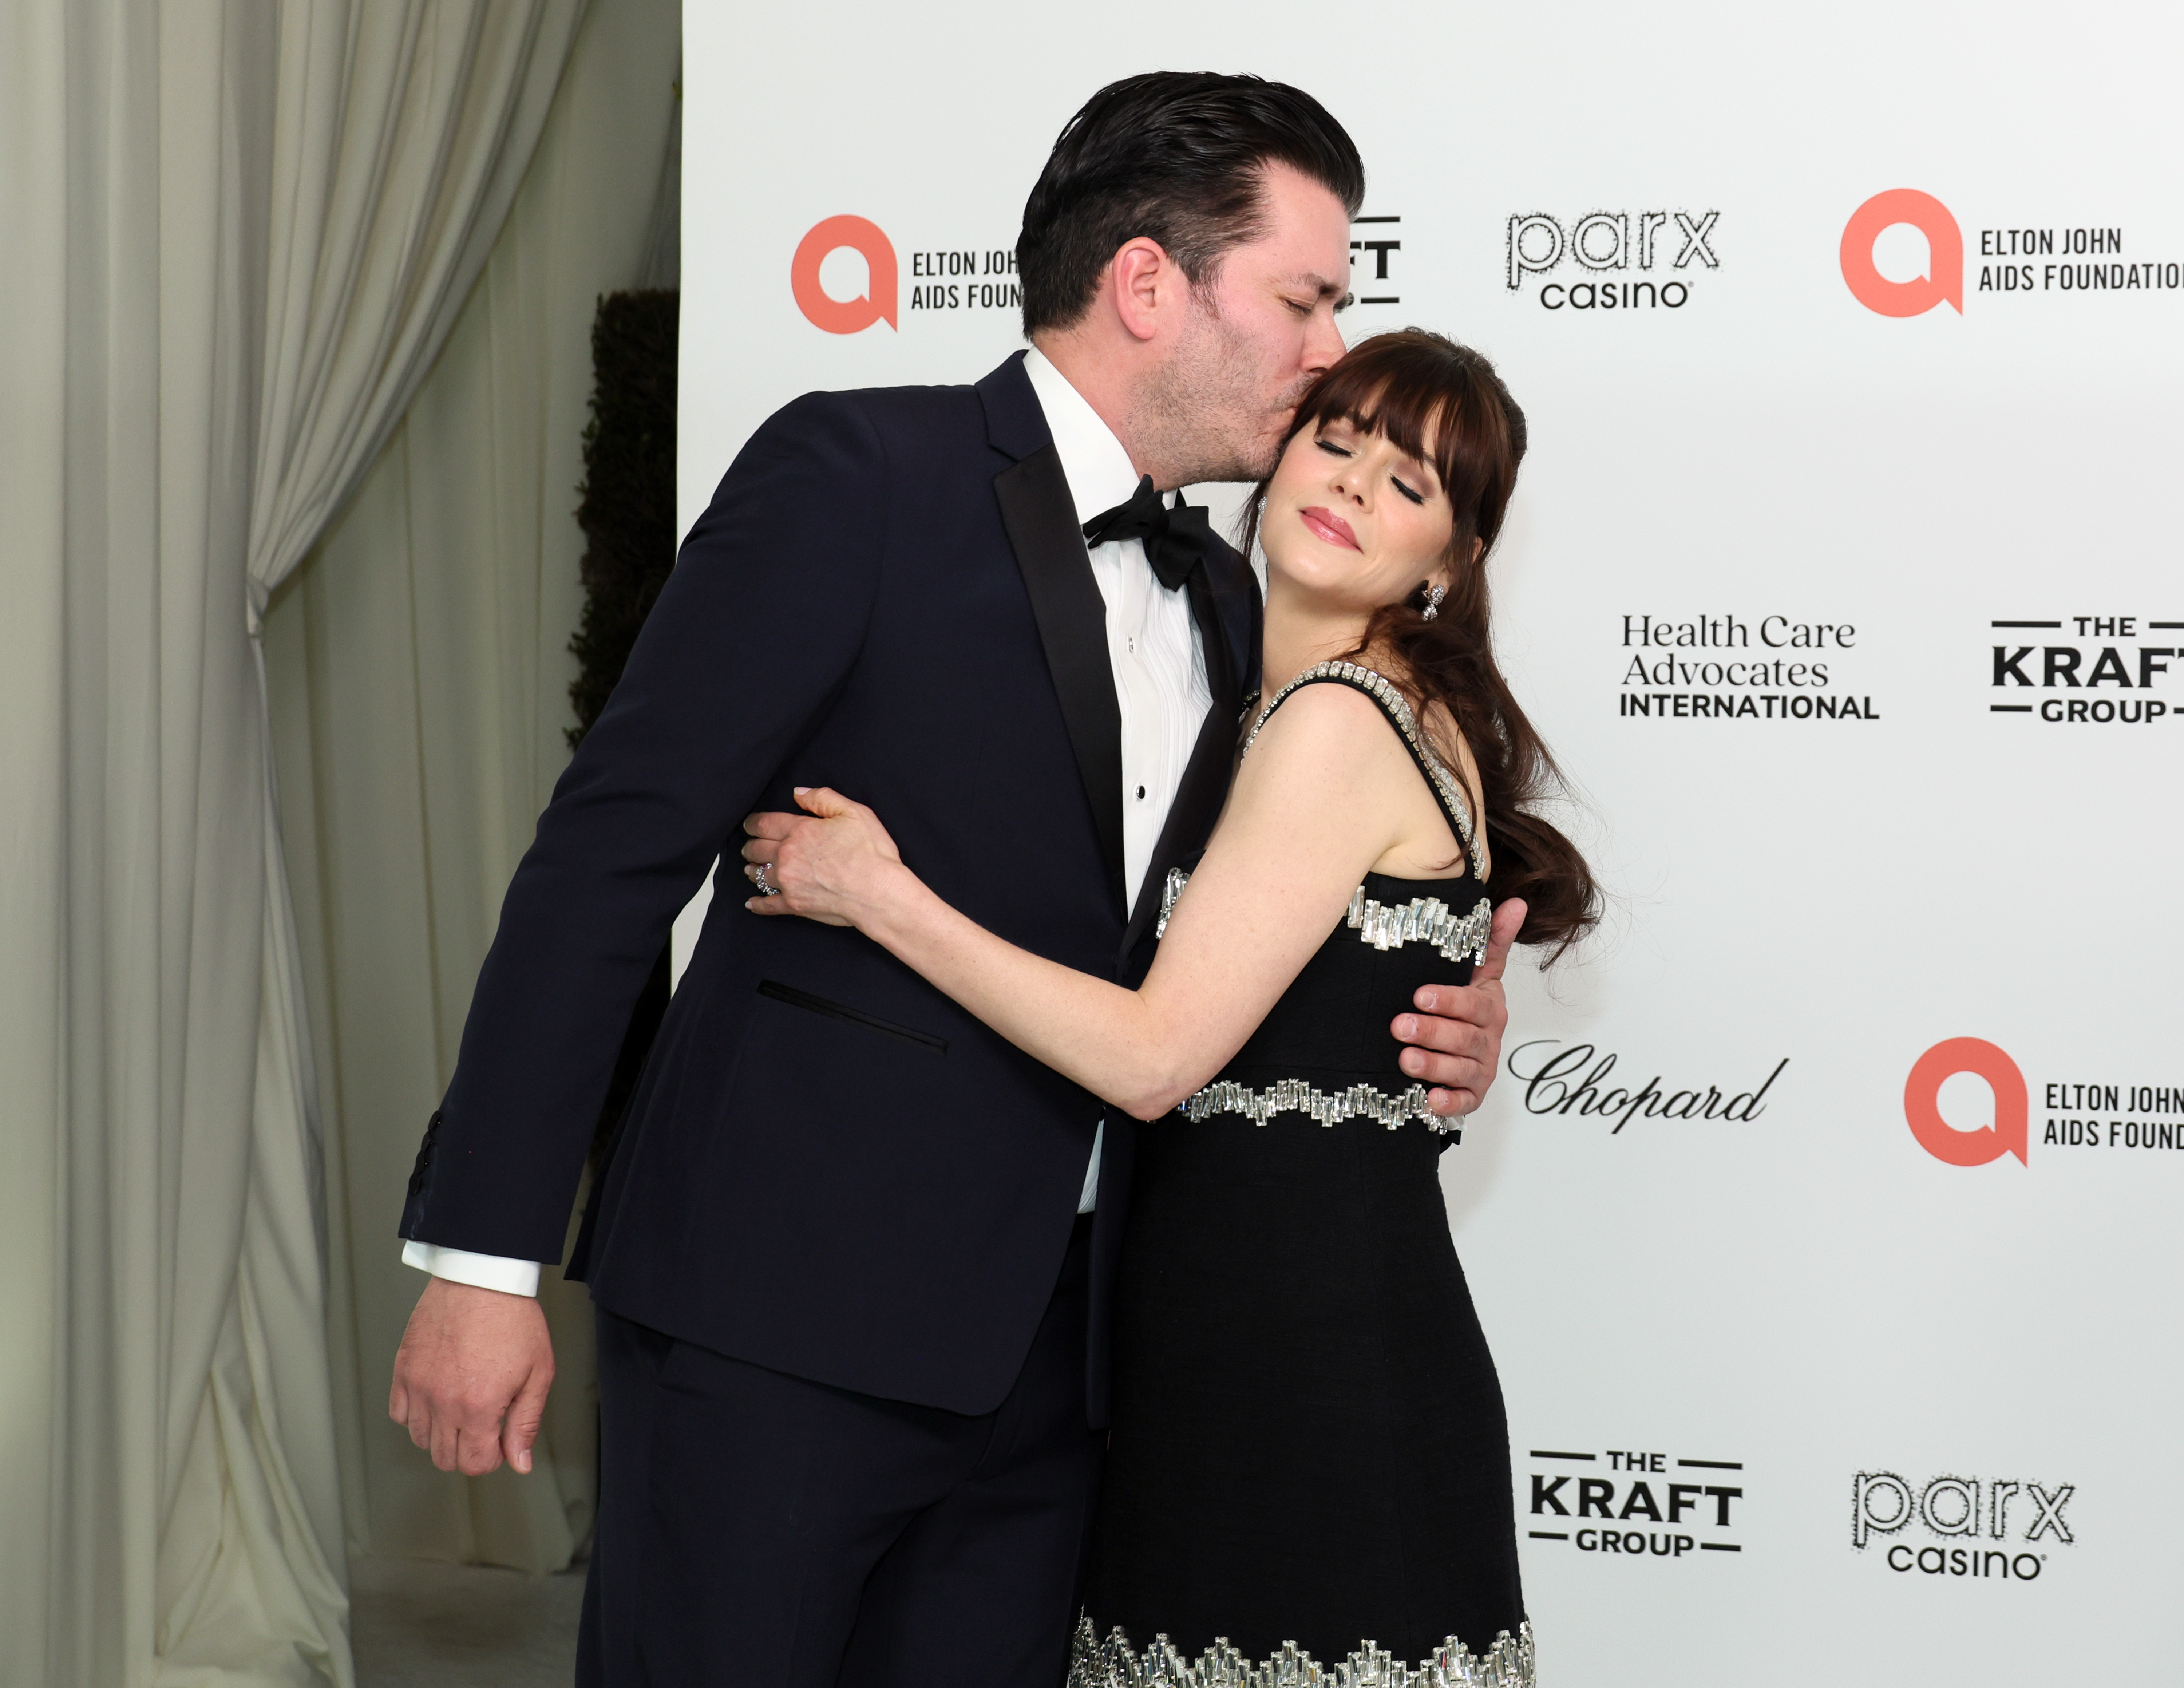 Zooey is currently dating HGTV notable, Jonathan Scott. The pair got engaged last year while vacationing in Scotland